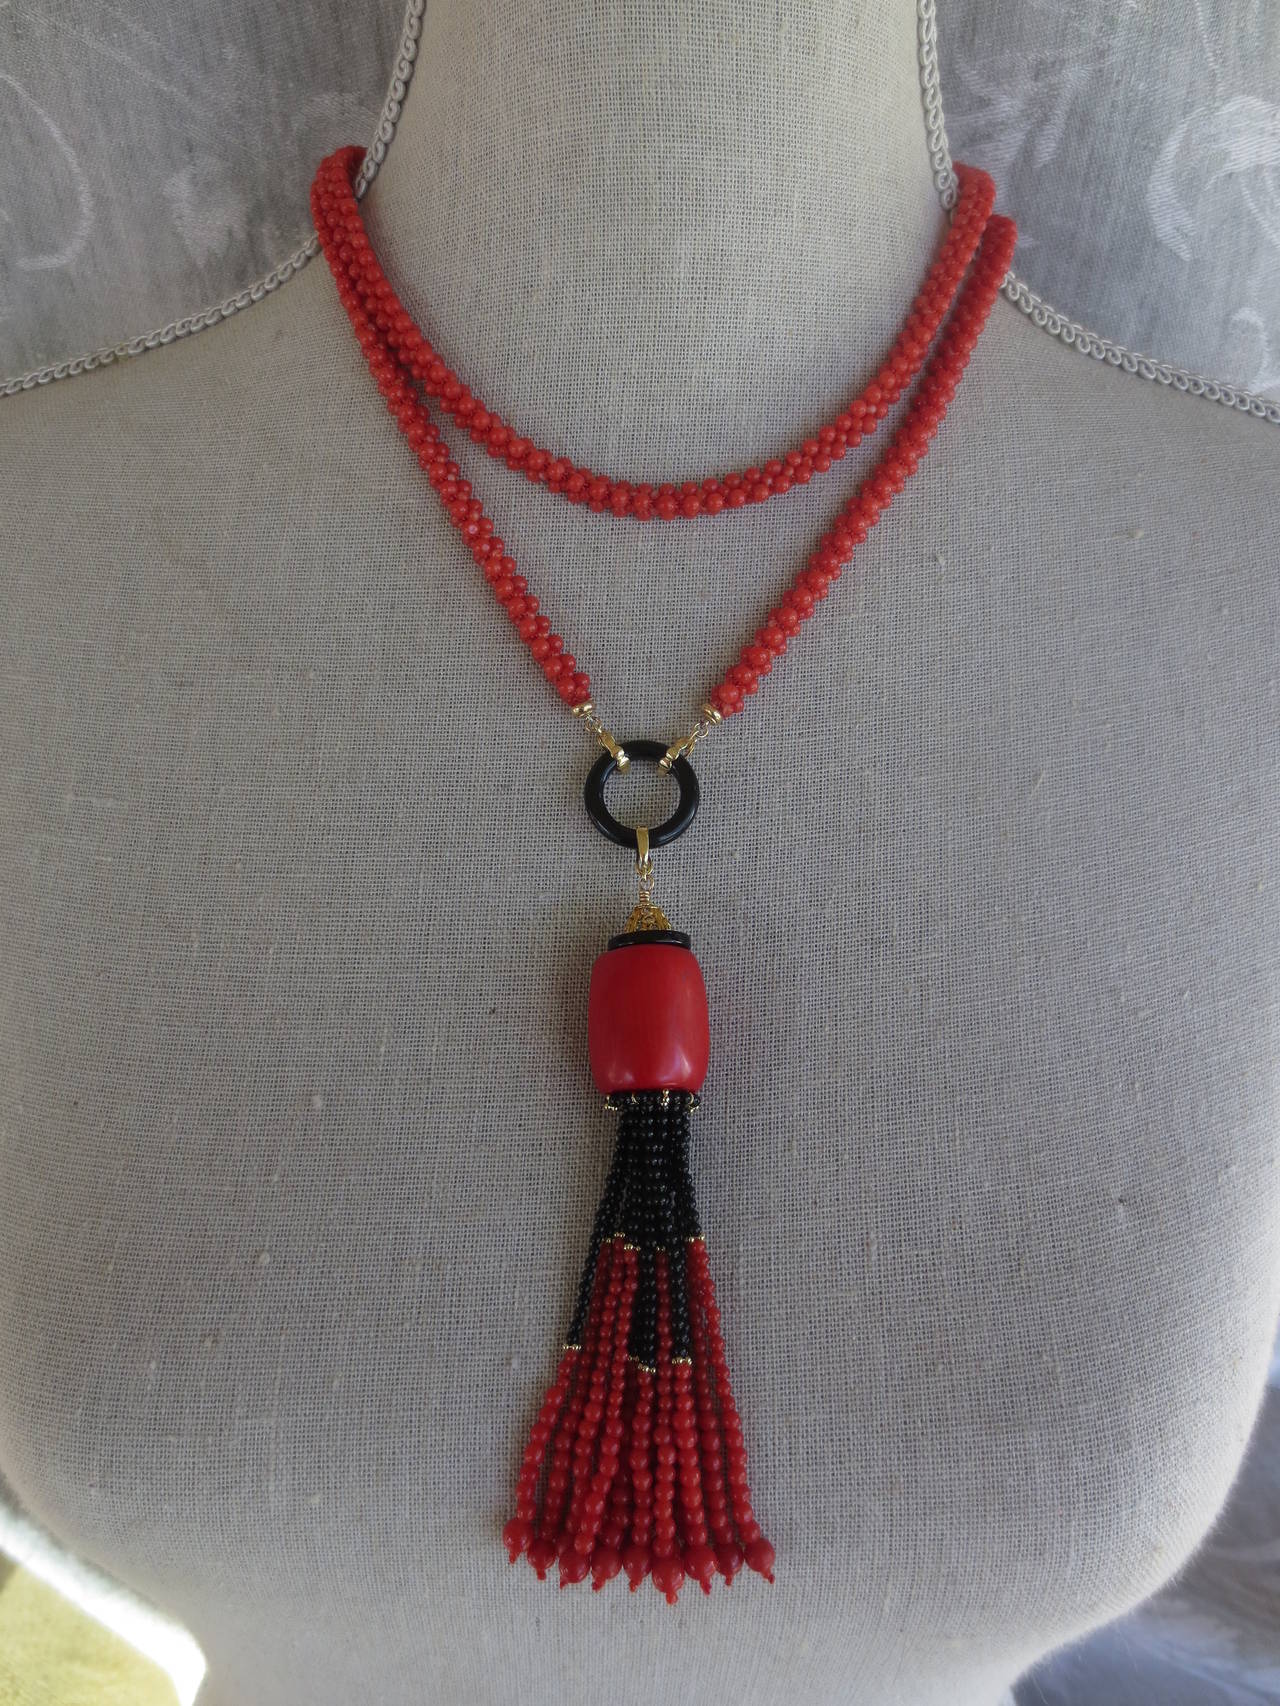 This gorgeous tassel is made of coral and onyx. Tassel strands are made of fine round coral onyx beads and drape from a large tubular coral bead accented with onyx and a yellow gold cup detailed with diamonds. Tassel measures approximately 4.5